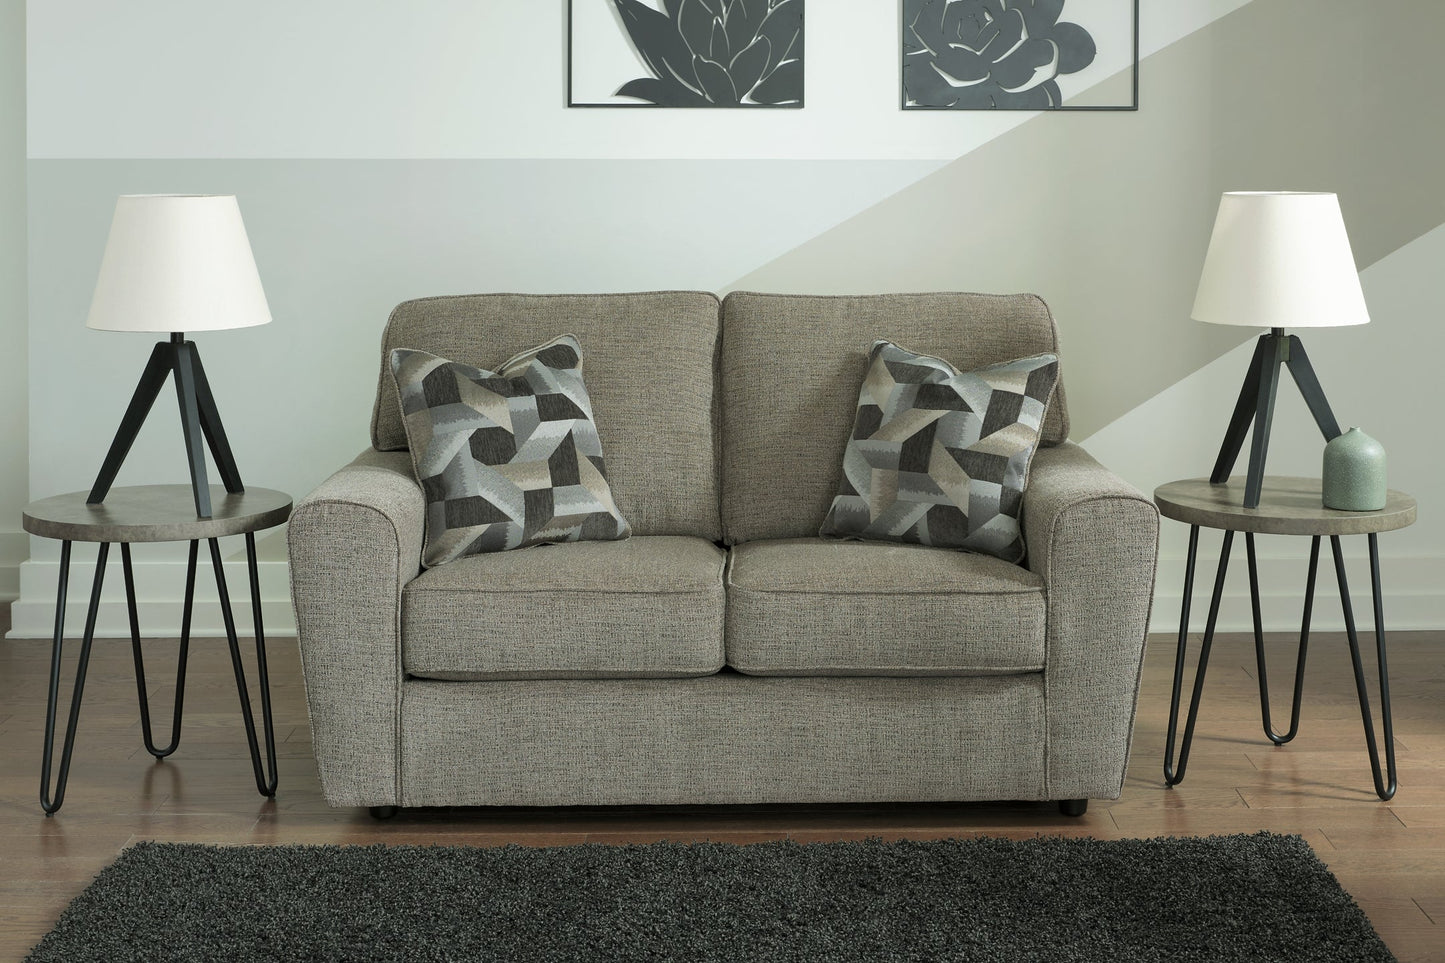 Cascilla Sofa, Loveseat, Chair and Ottoman at Walker Mattress and Furniture Locations in Cedar Park and Belton TX.